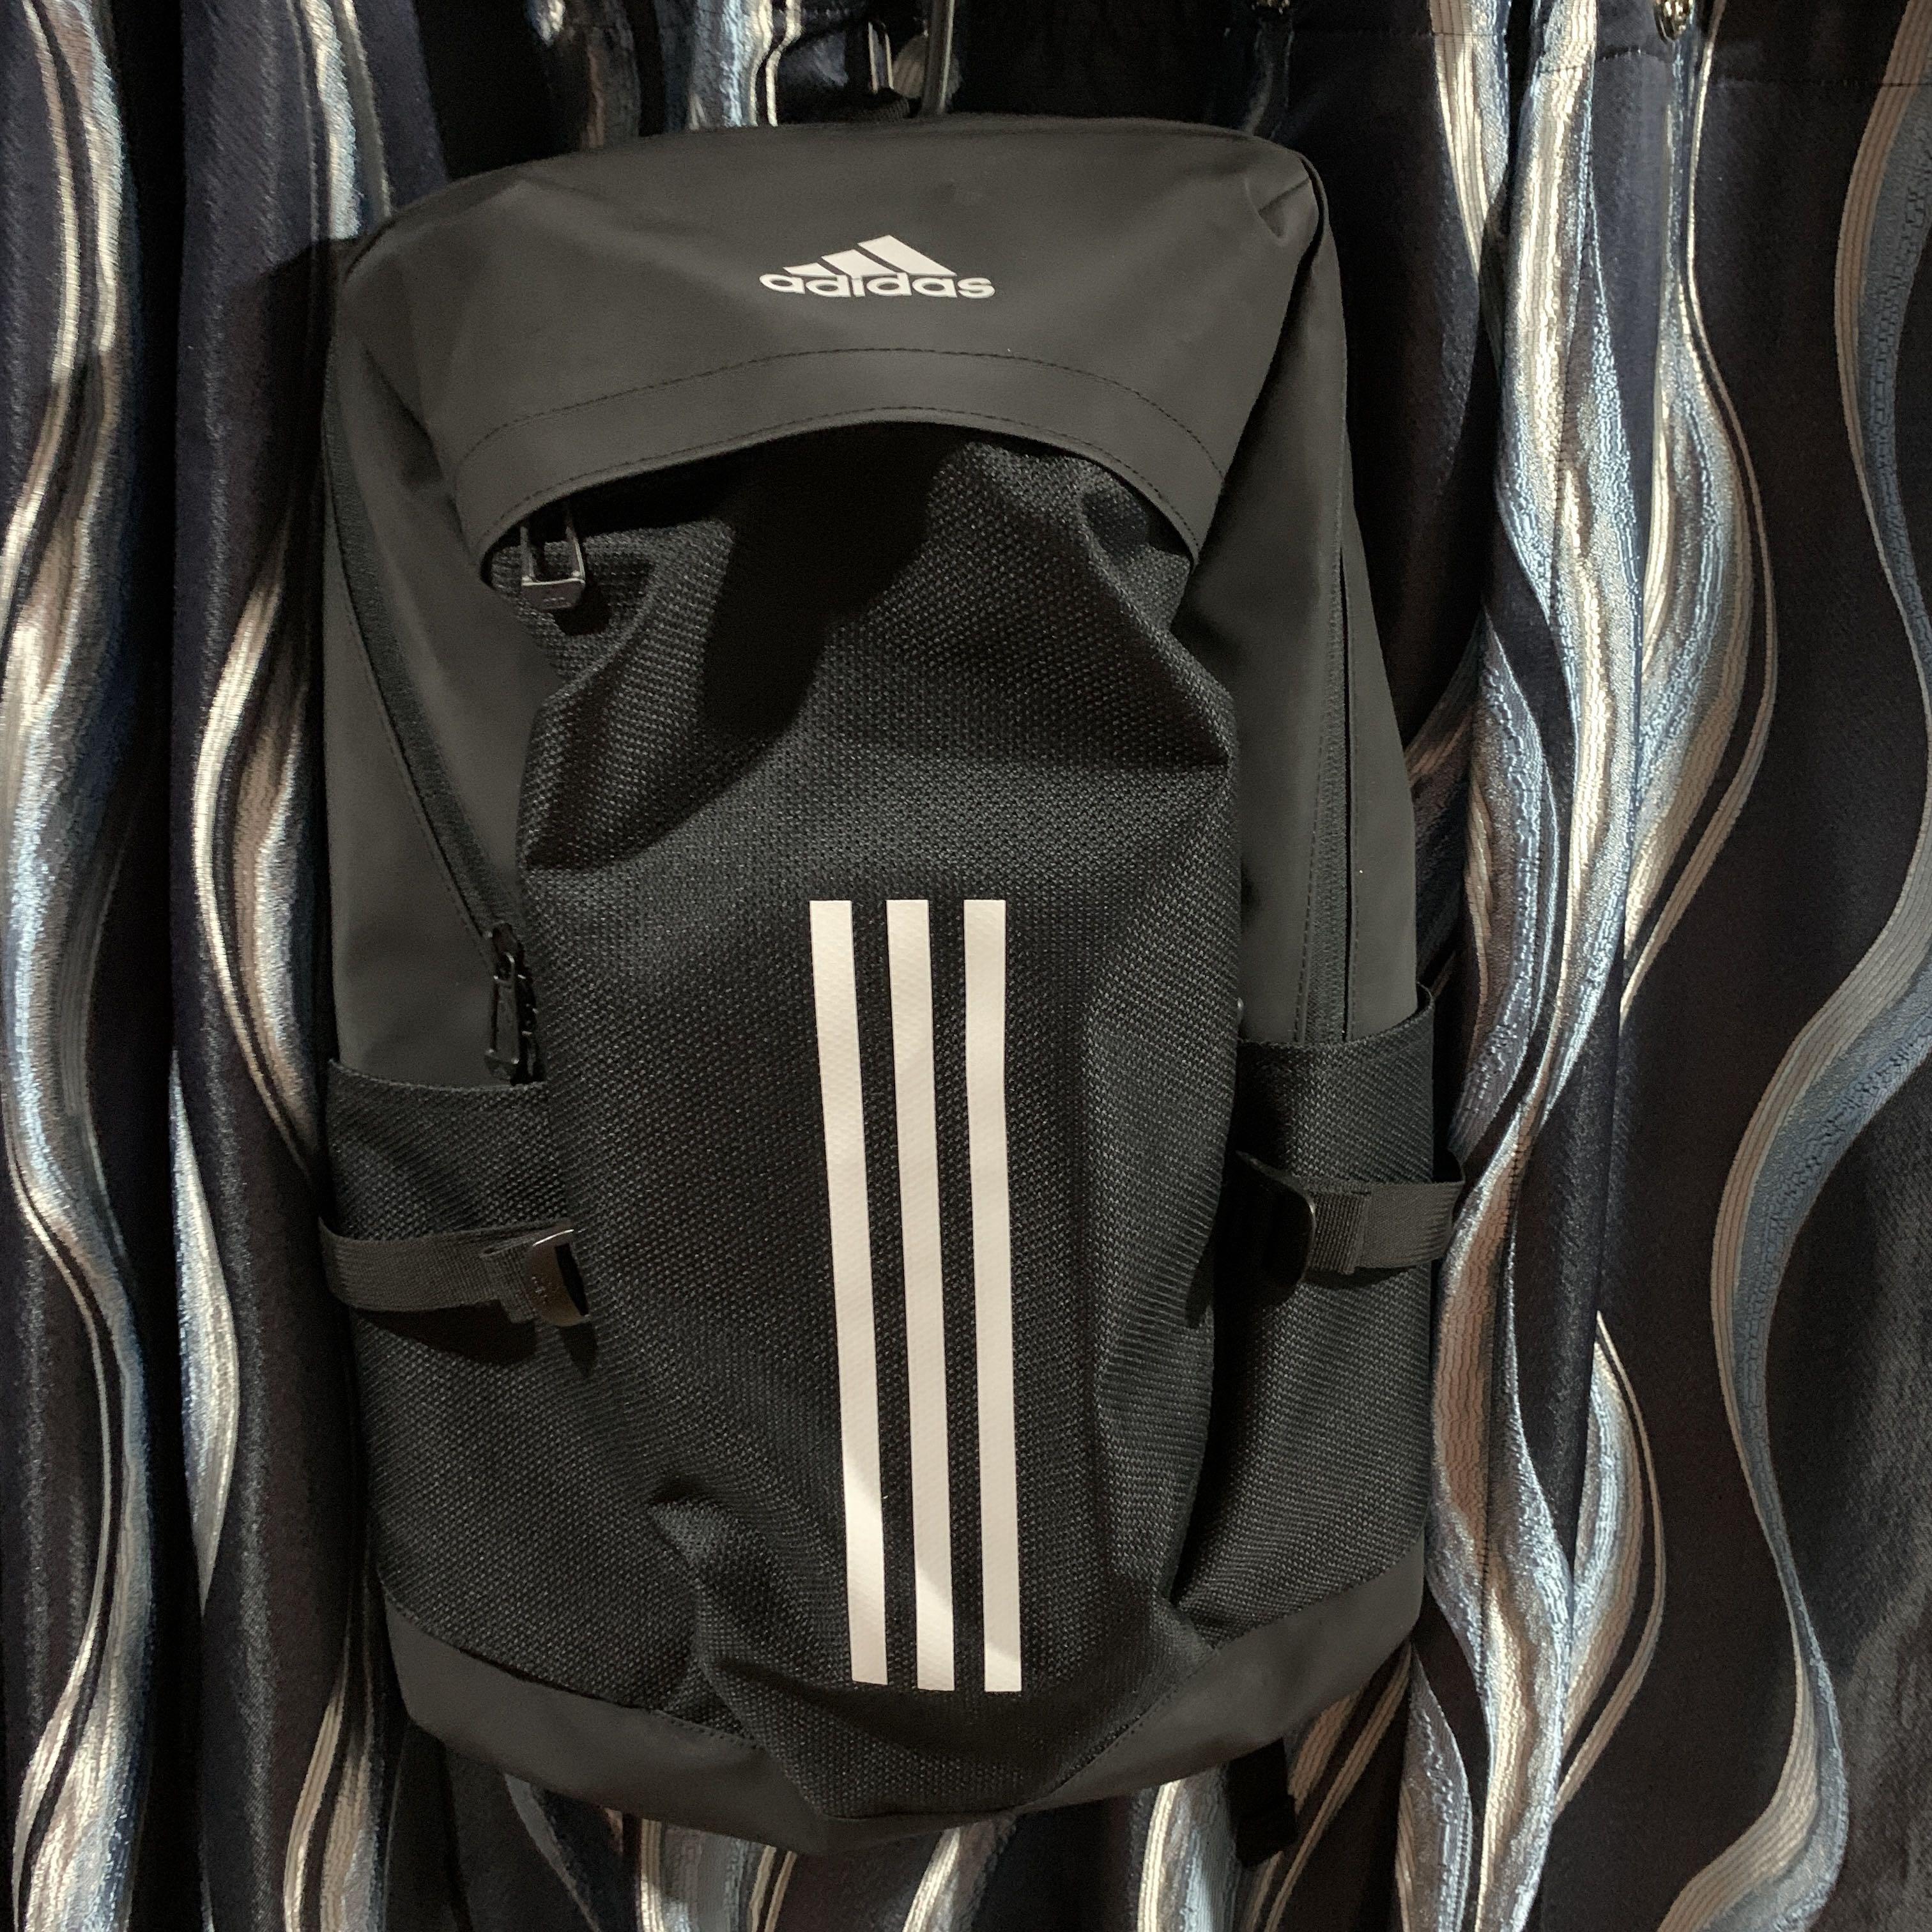 ADIDAS ENDURANCE PACKING BACKPACK 30L, Men's Fashion, Bags, Backpacks on Carousell